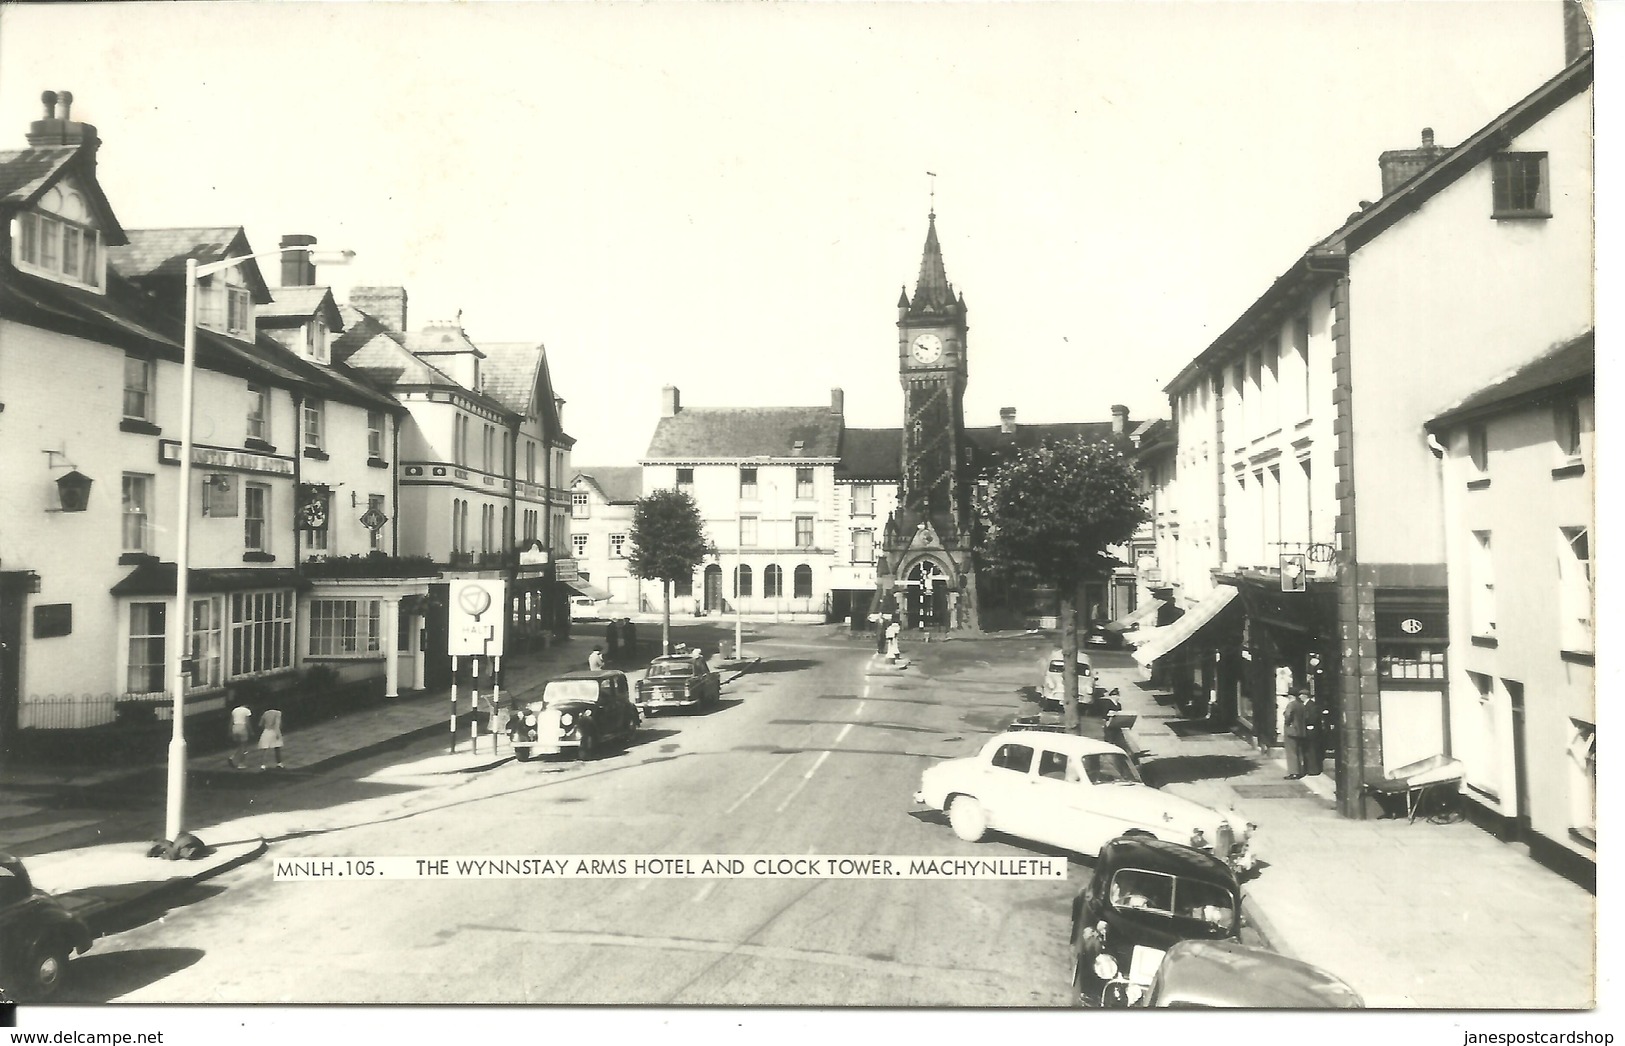 REAL PHOTOGRAPHIC POSTCARD - THE WYNNSTAY ARMS HOTEL AND CLOCK TOWER MACHYNLLETH - Montgomeryshire